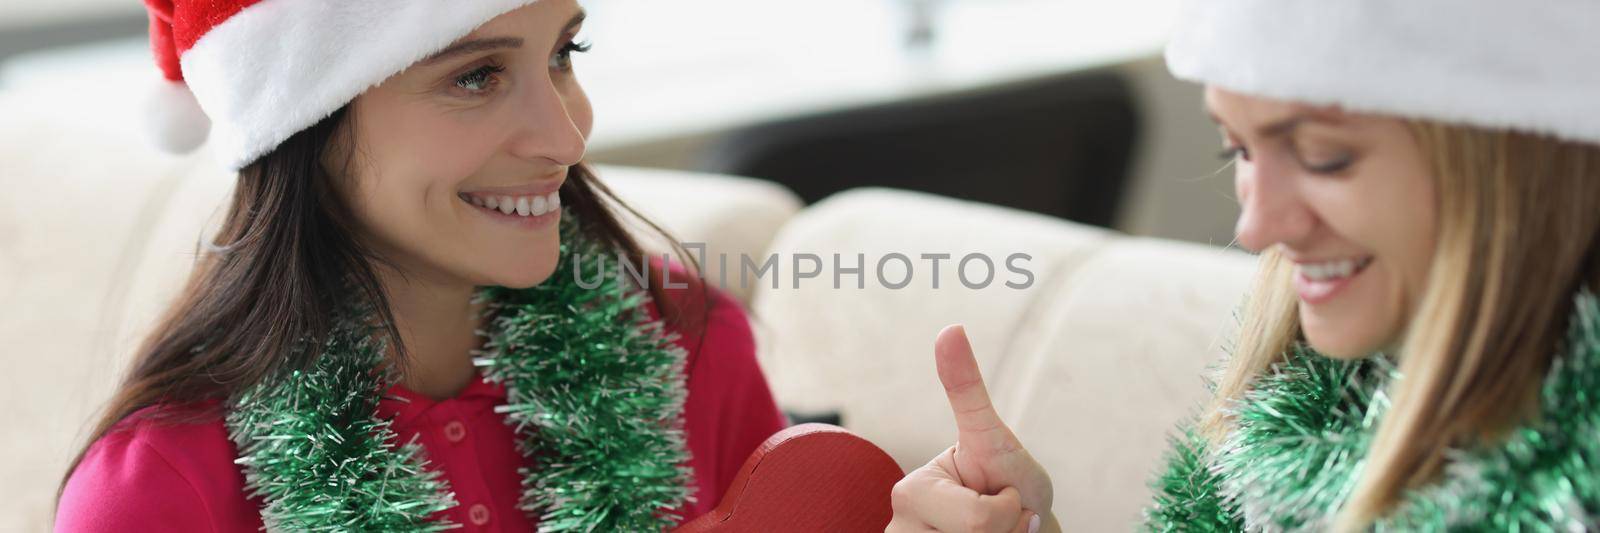 Portrait of woman receive present from sister in red box new model of smartphone. Festive mood and christmas outfit, celebrate new year. Holiday concept